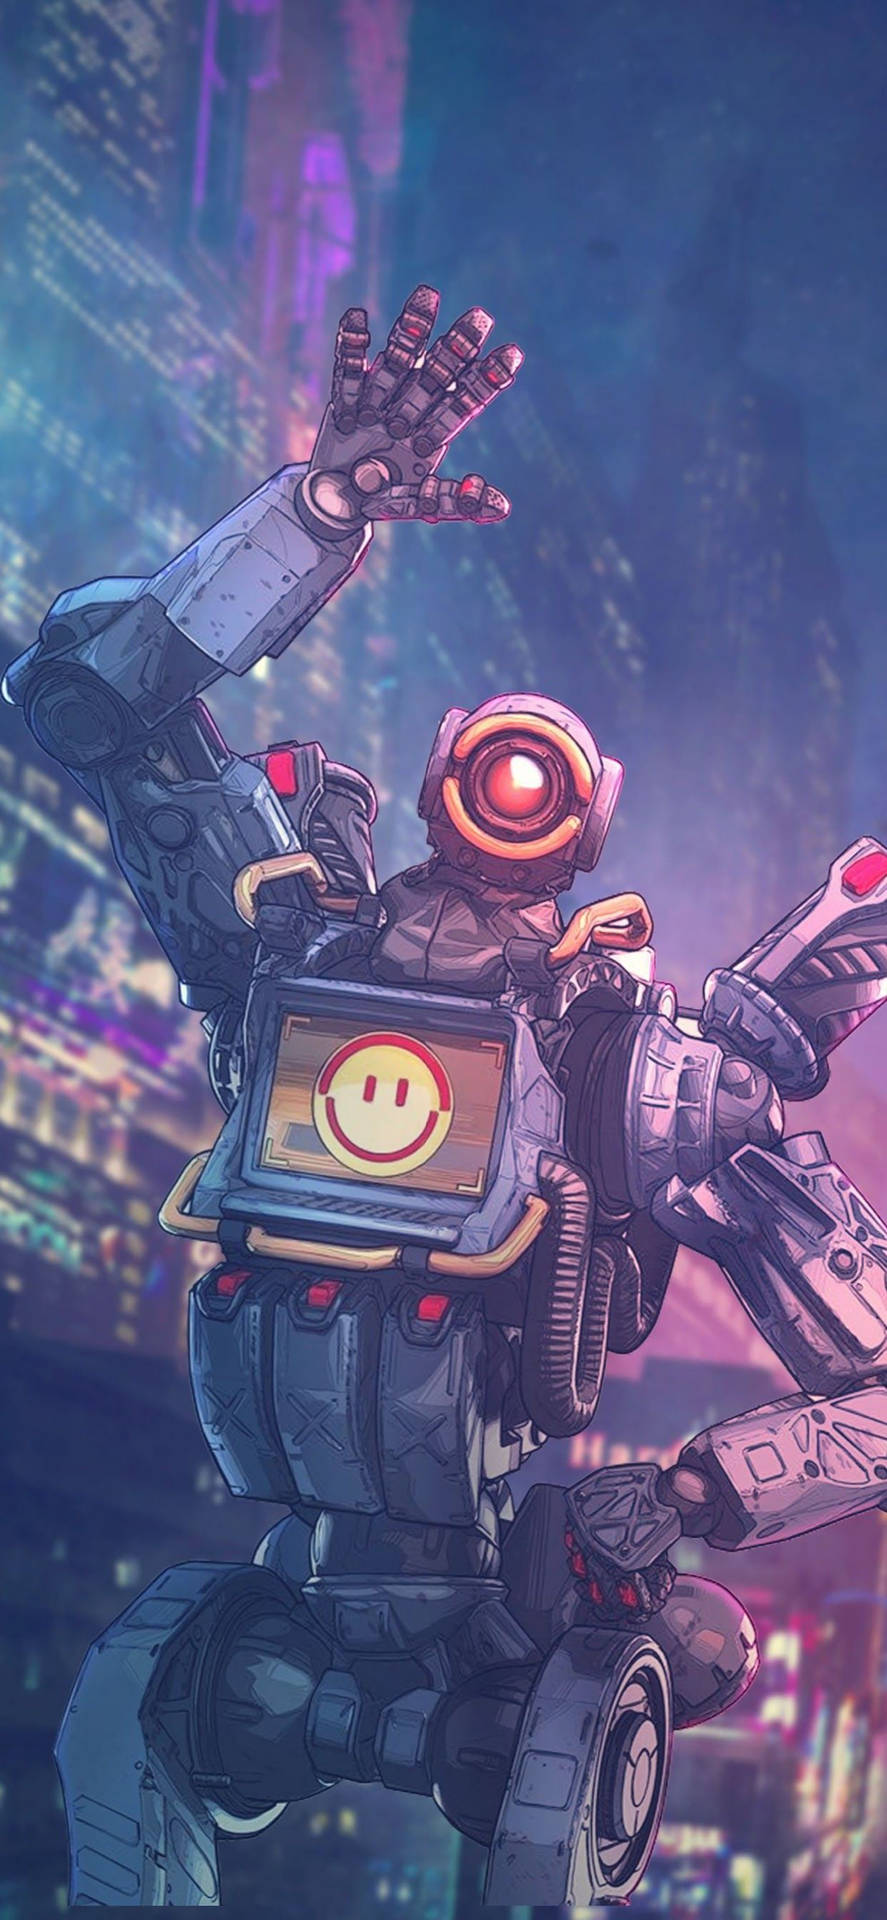 Get ready to breach and jump into the Battle Royale with Apex Legends Mobile Wallpaper